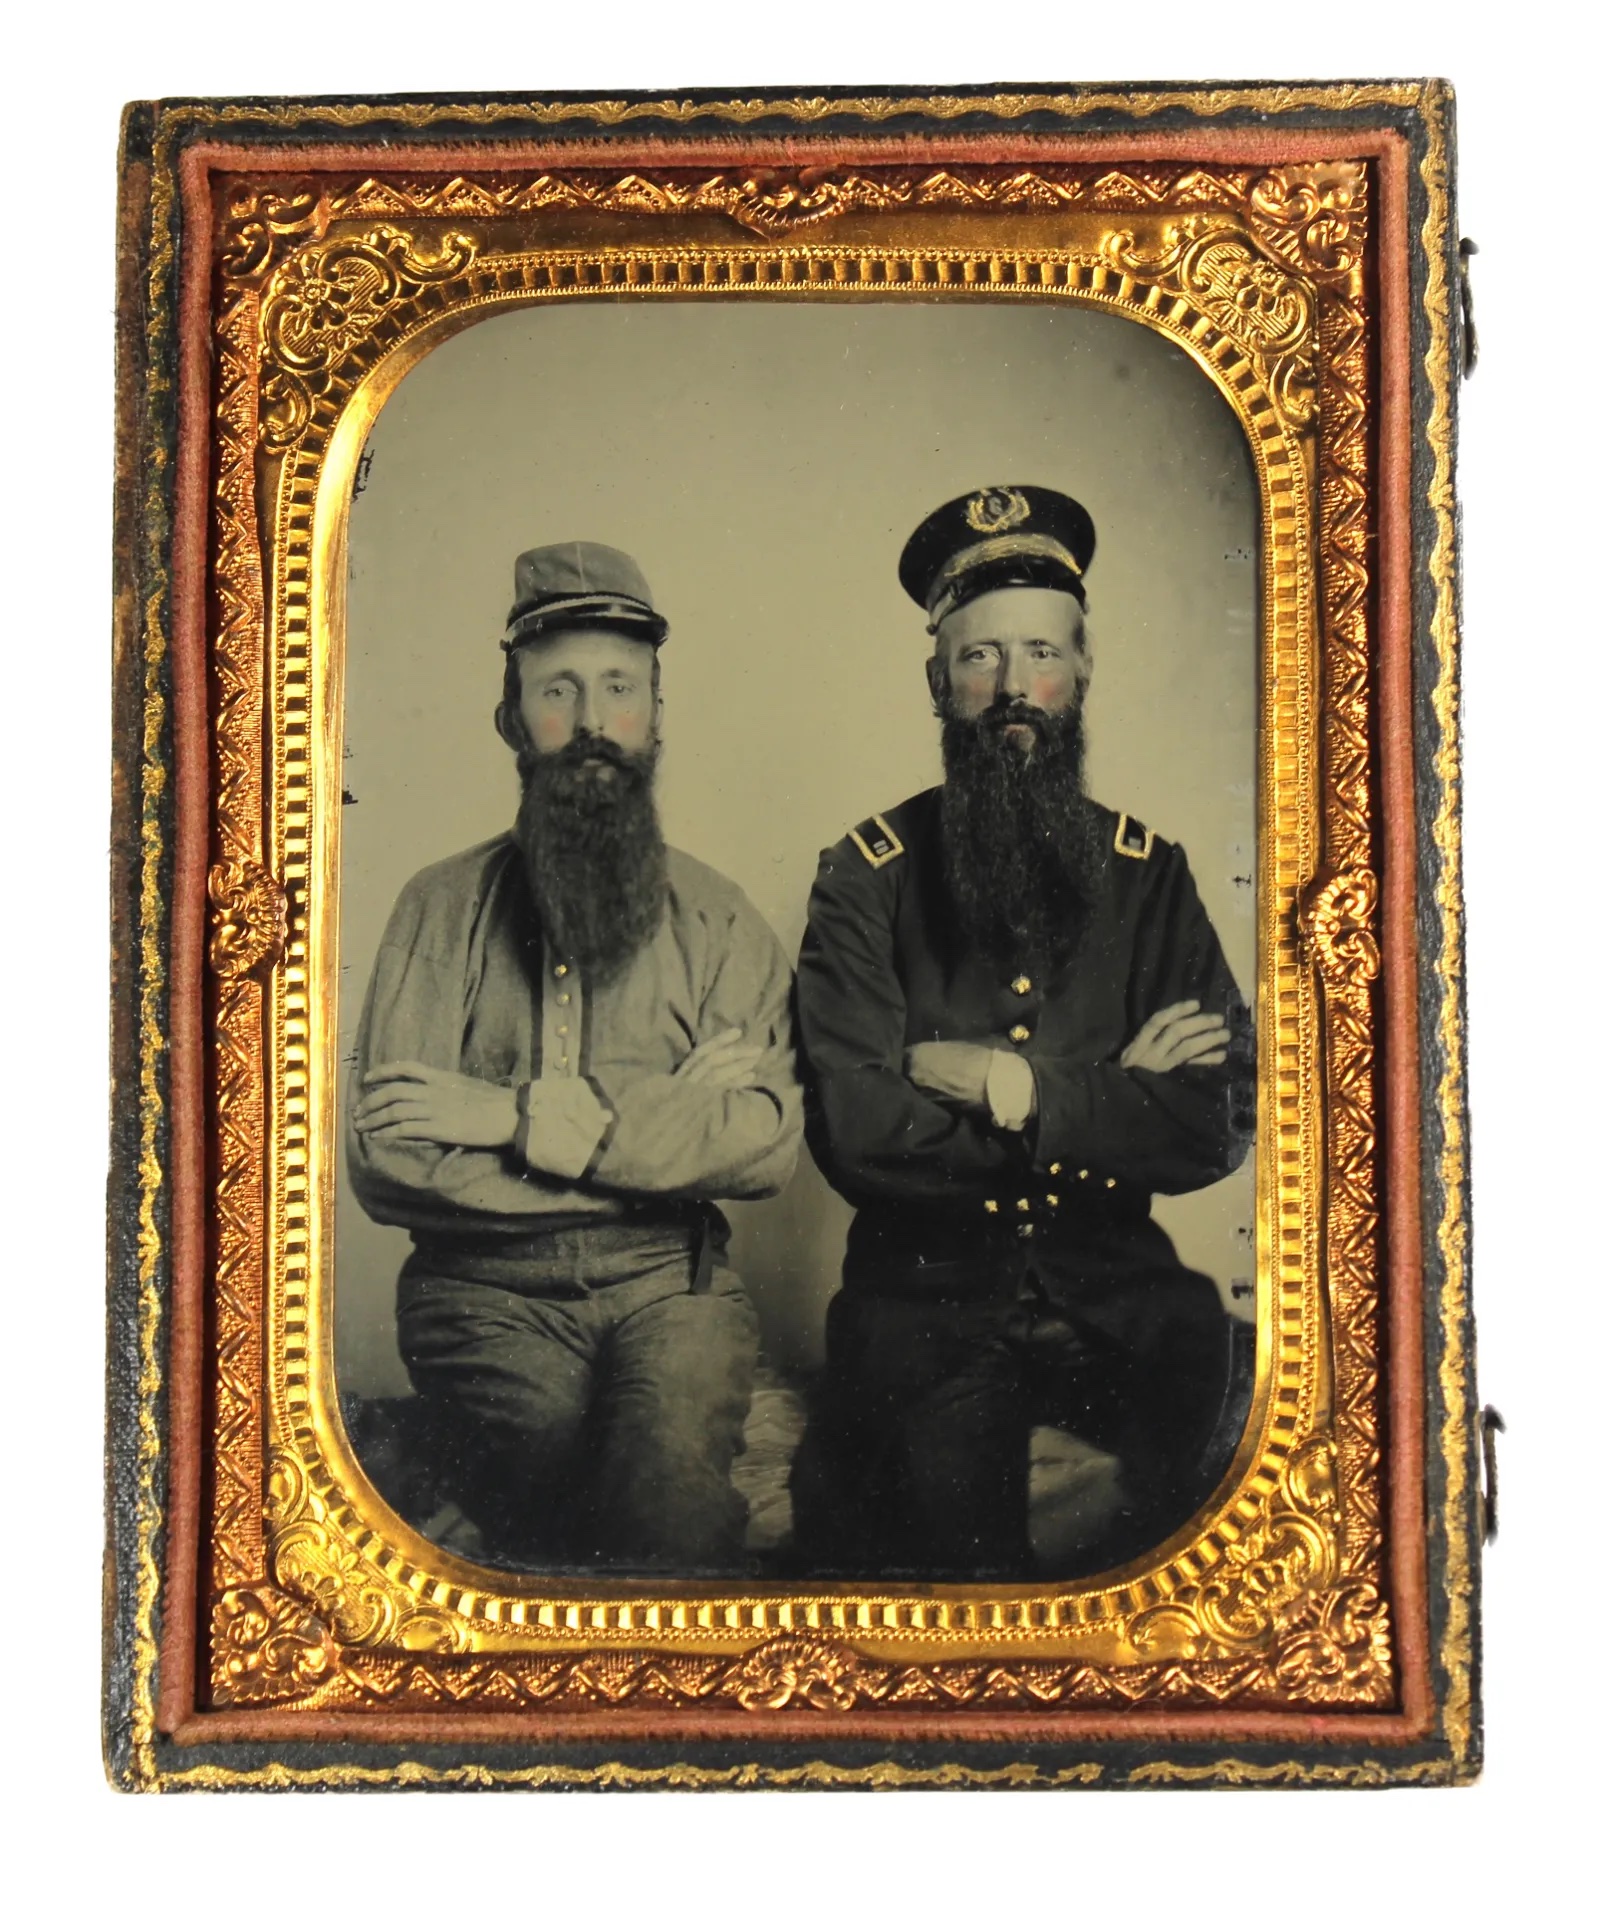 Circa-1862 ambrotype of Calvin and James Walker of the 3rd Tennessee Infantry (Cook’s Tennessee Brigade), which sold for $19,500 ($23,985 with buyer’s premium) at Fleischer's.